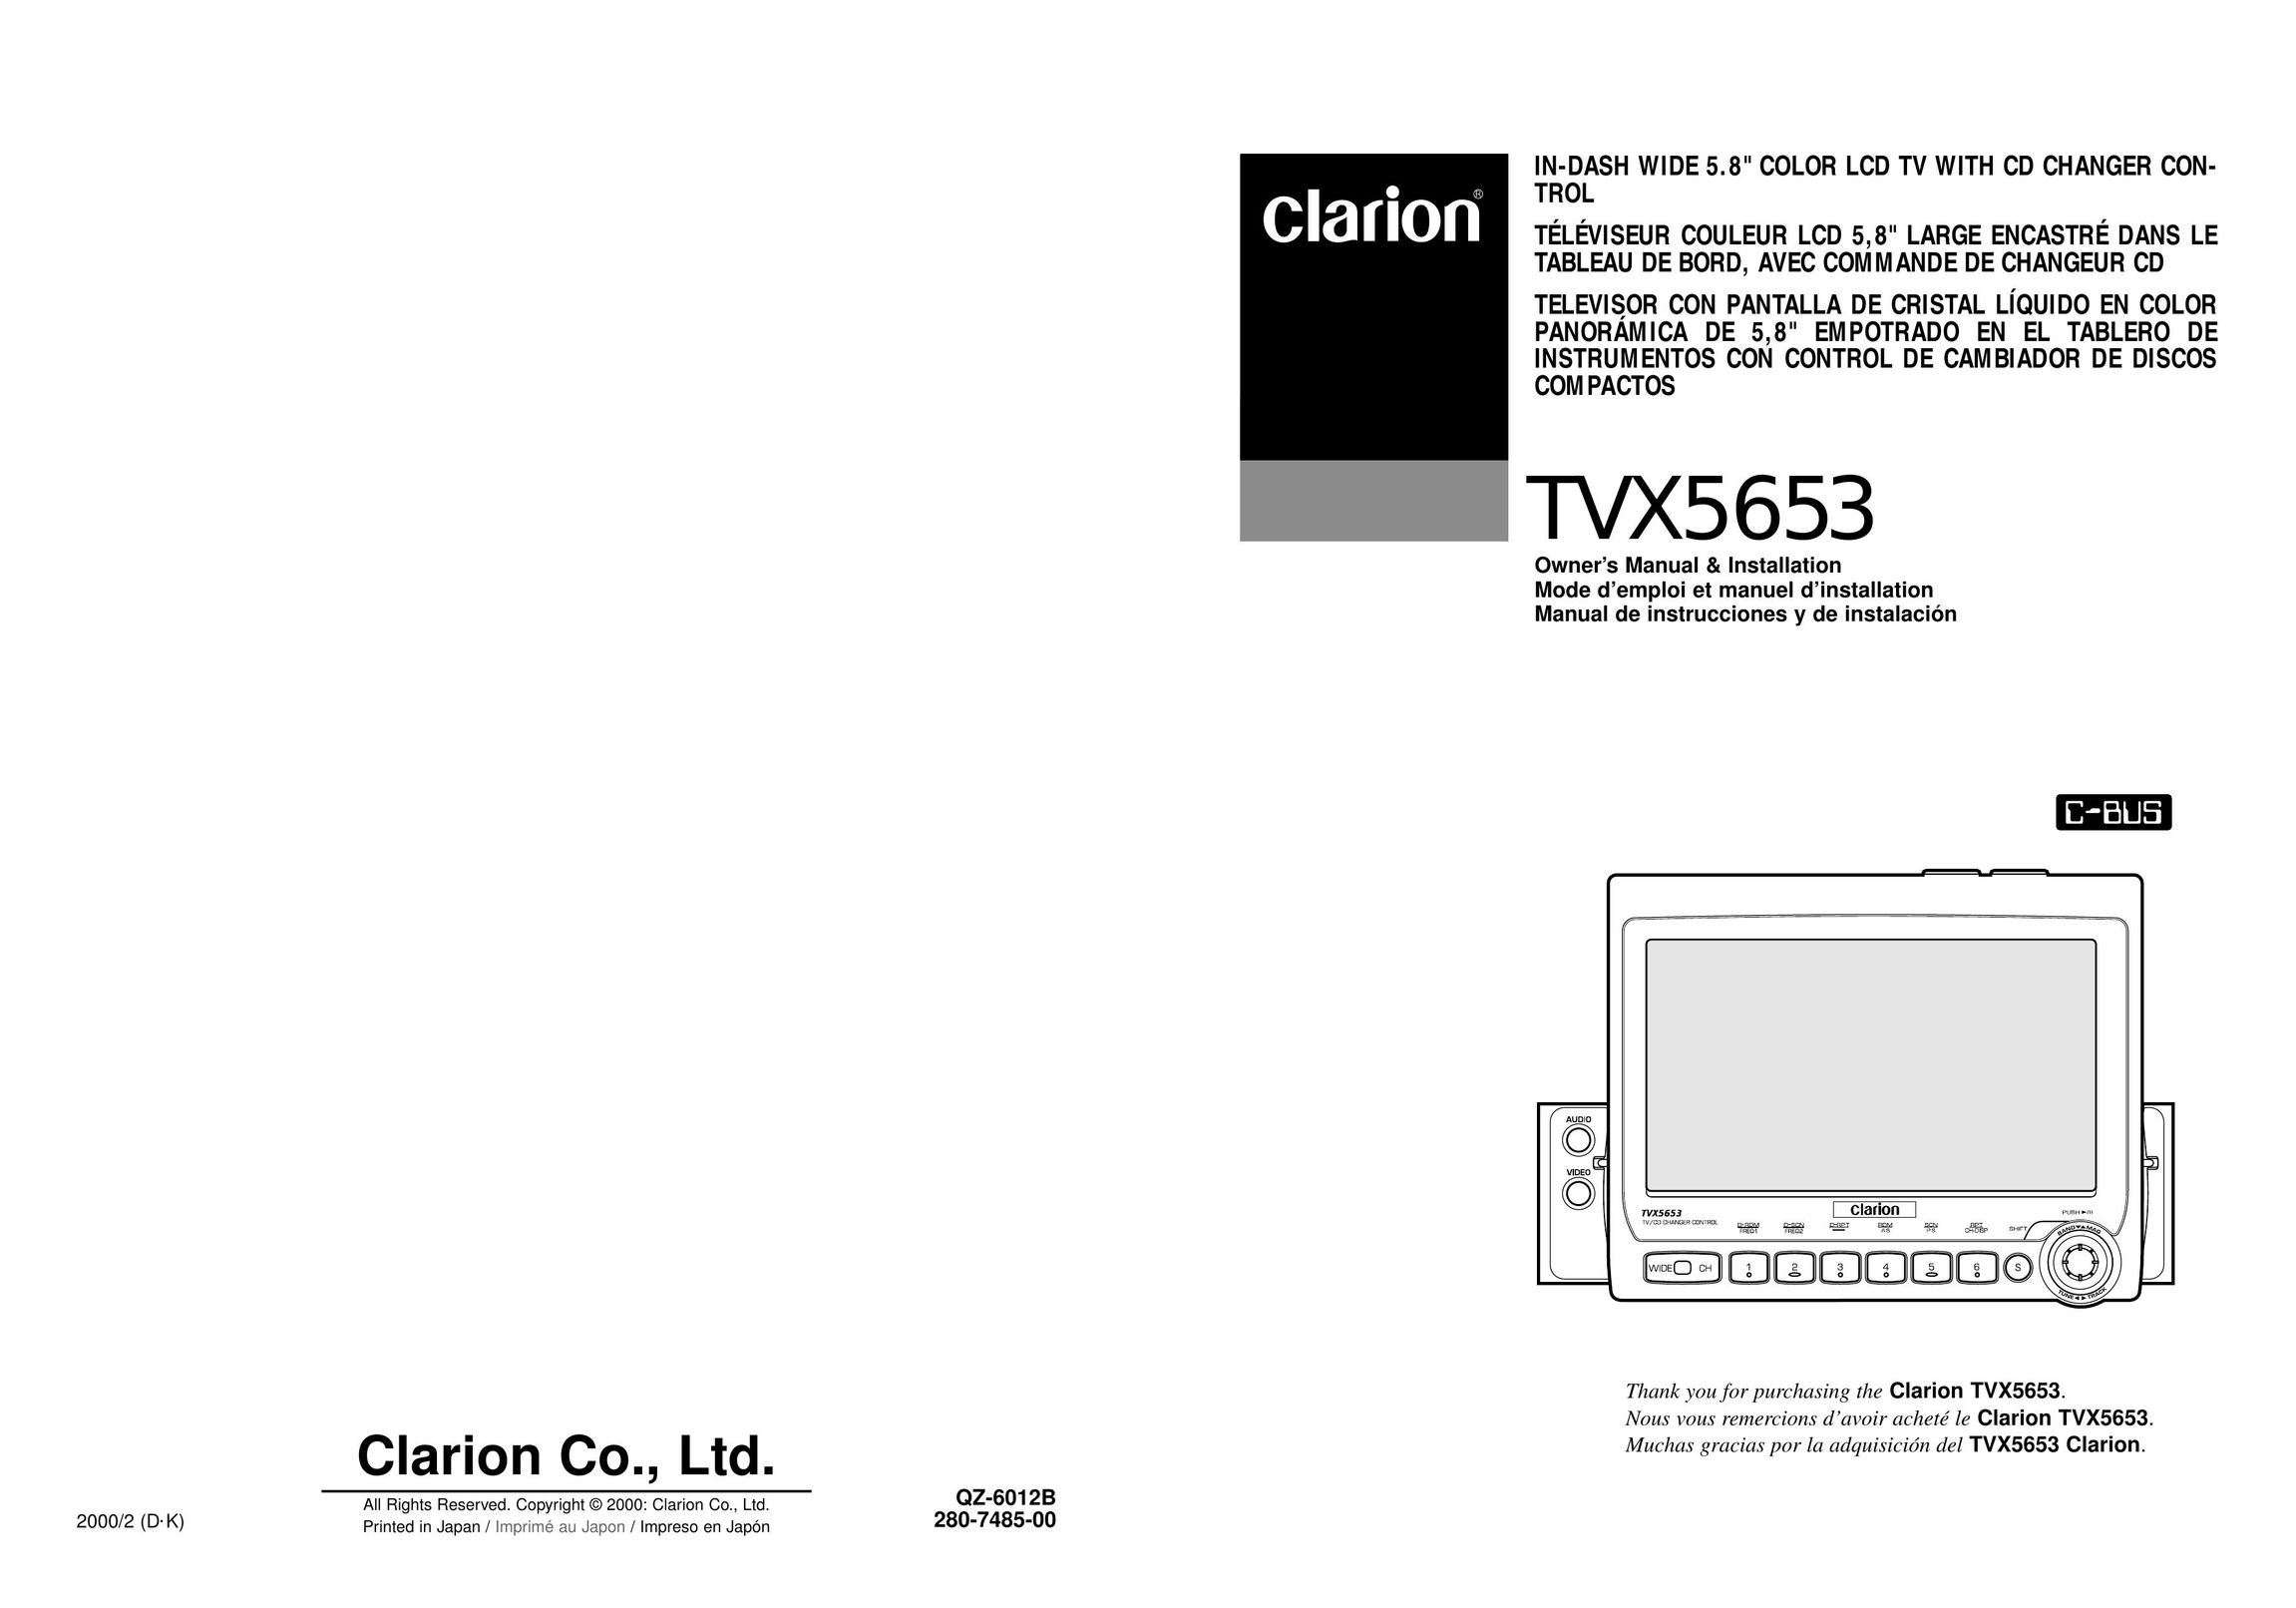 Clarion TVX5653 Flat Panel Television User Manual